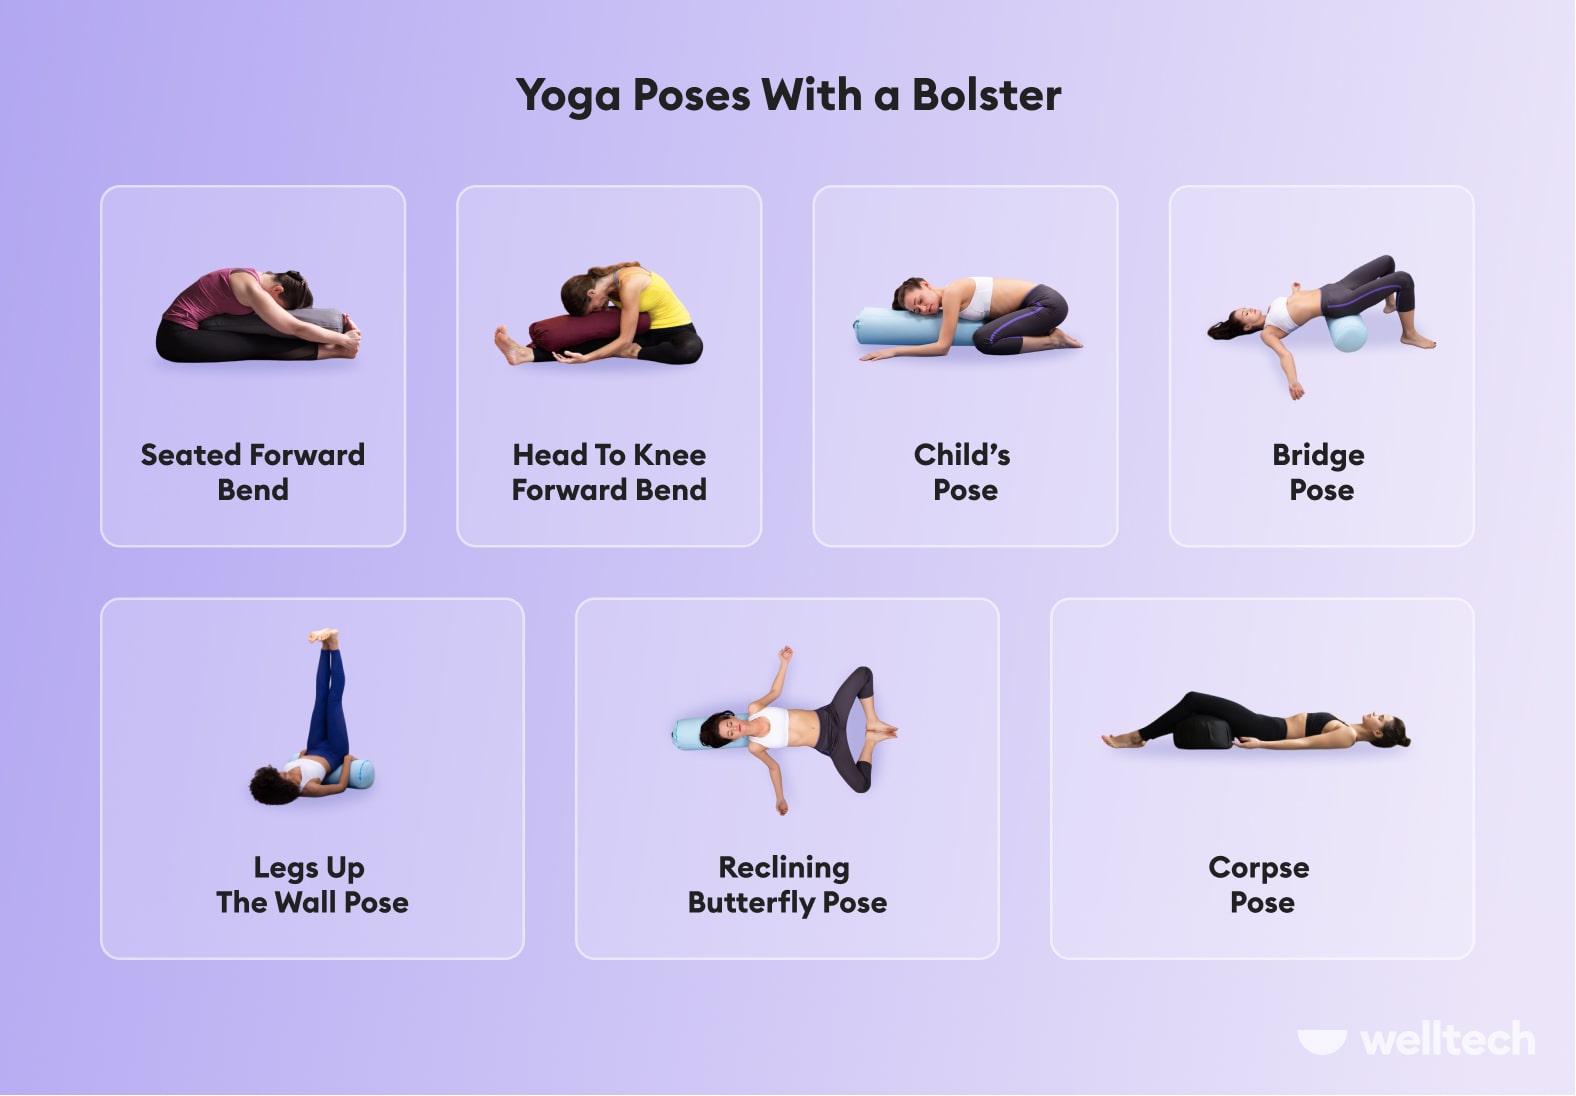 Yoga Poses - Helpful How-To Guides | DOYOU.com